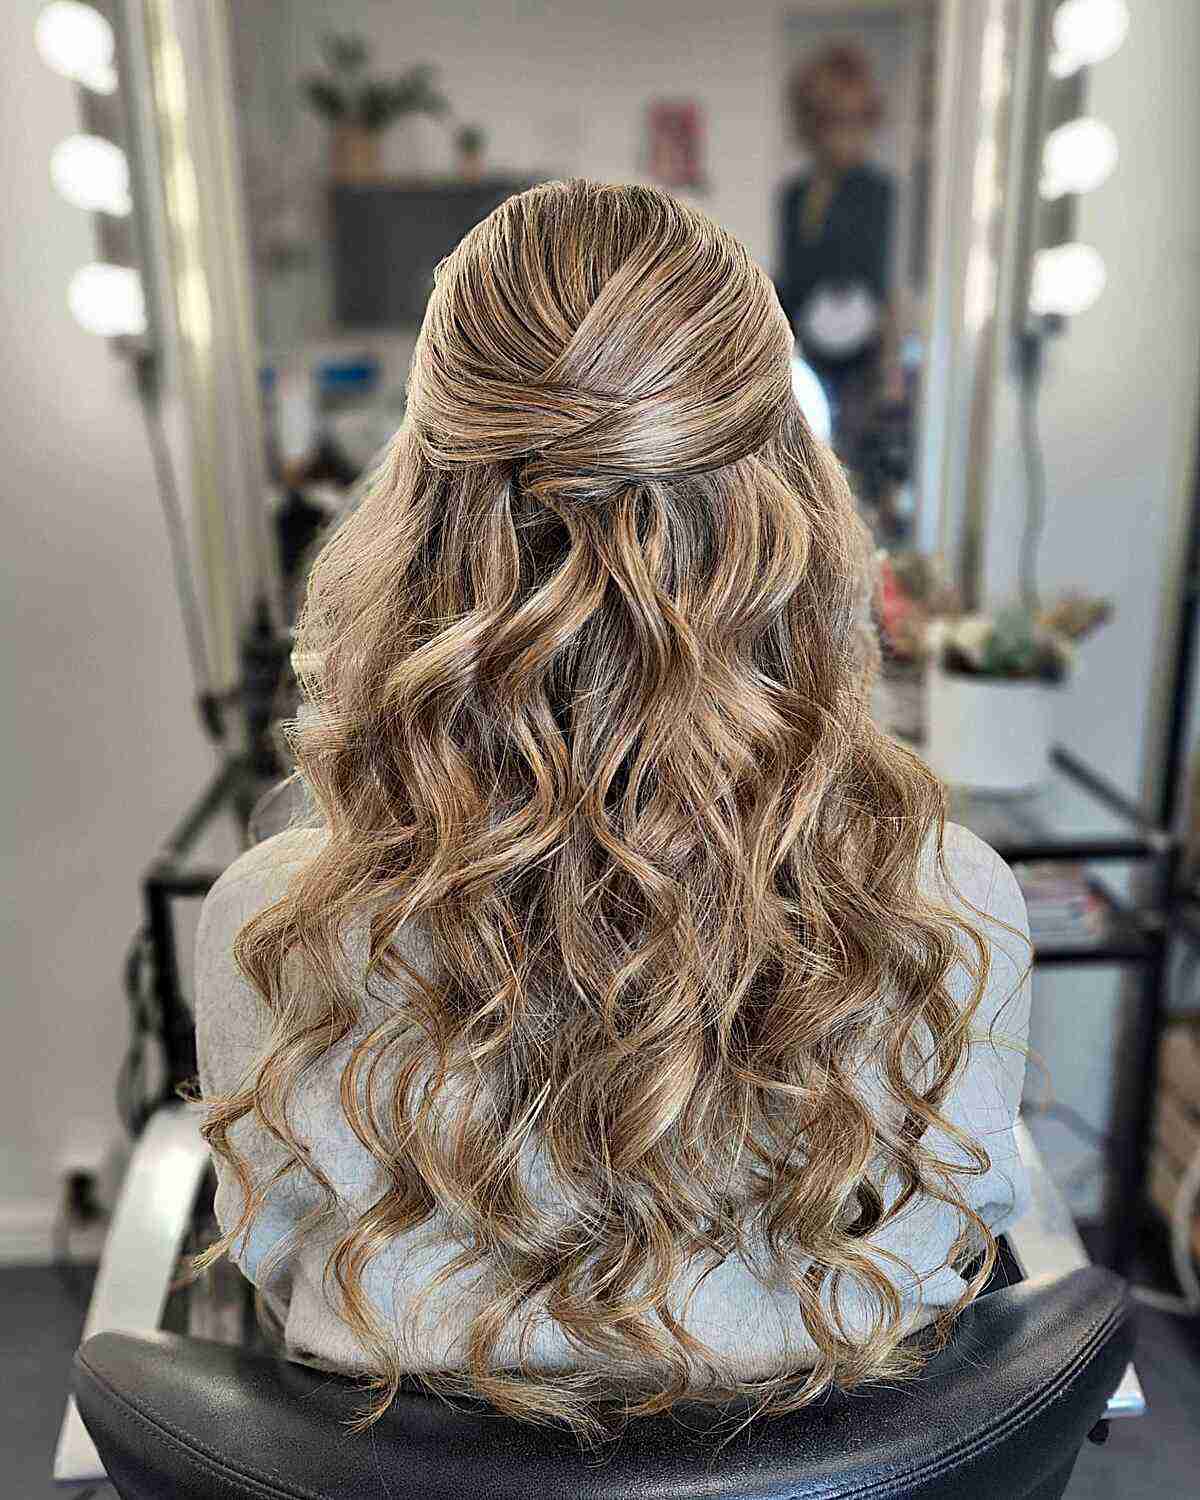 An Easy Prom Updo You Can DIY - David's Bridal Blog